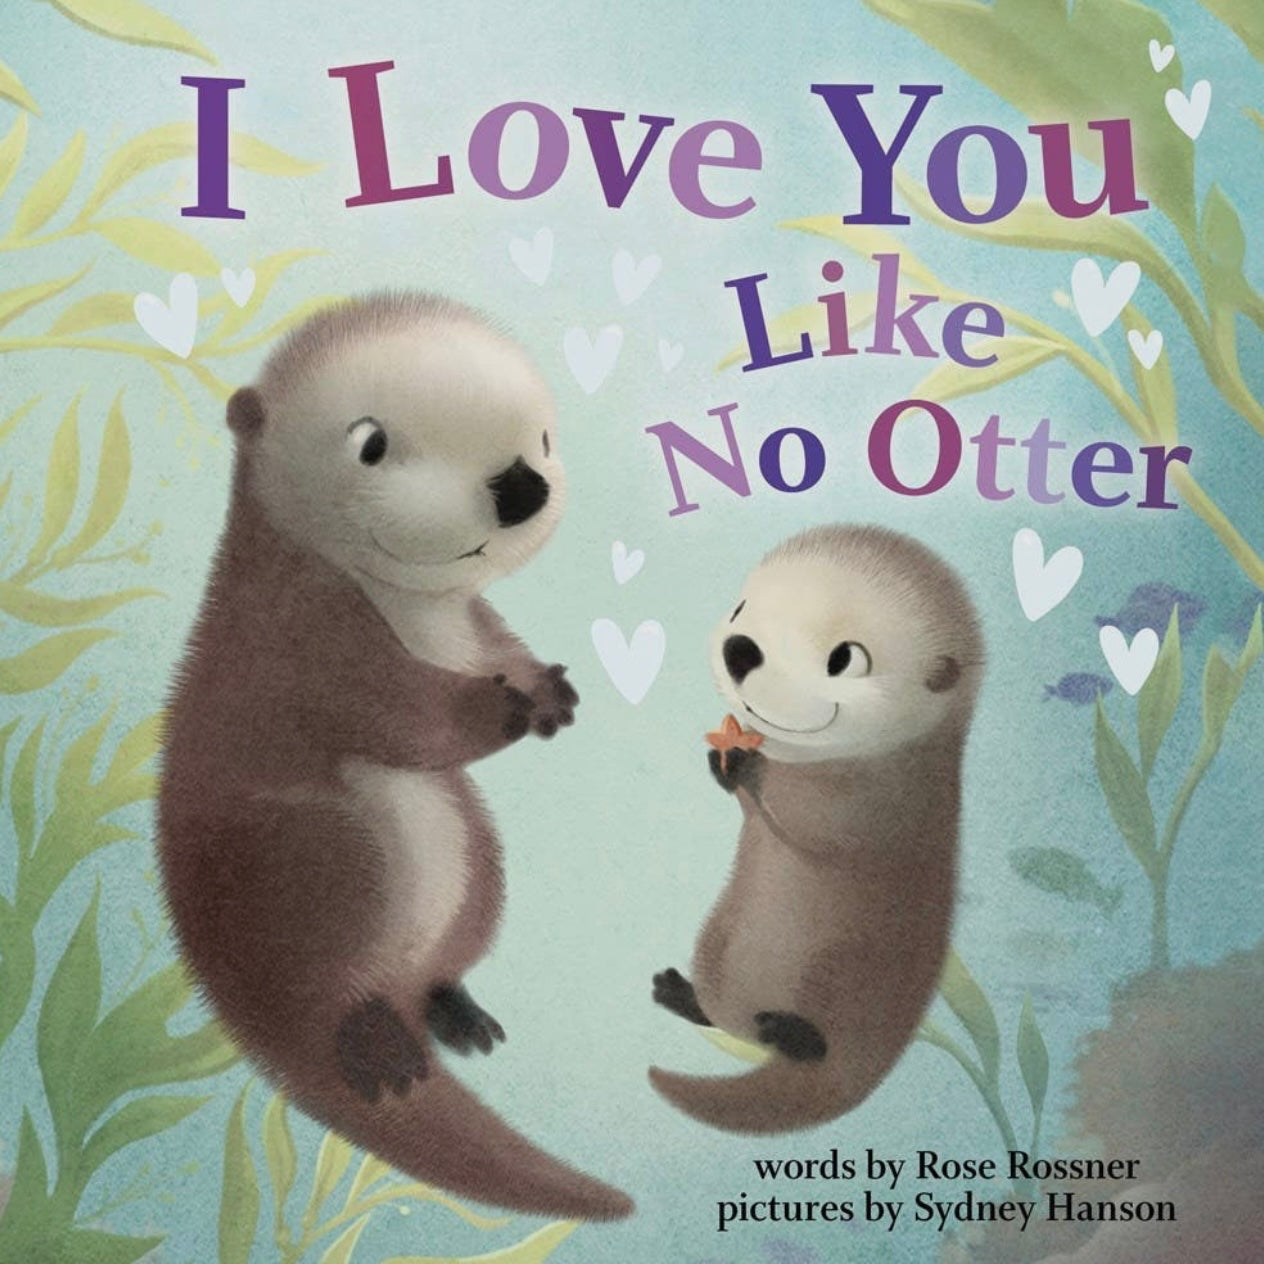 I Love You Like No Otter Hardcover Book